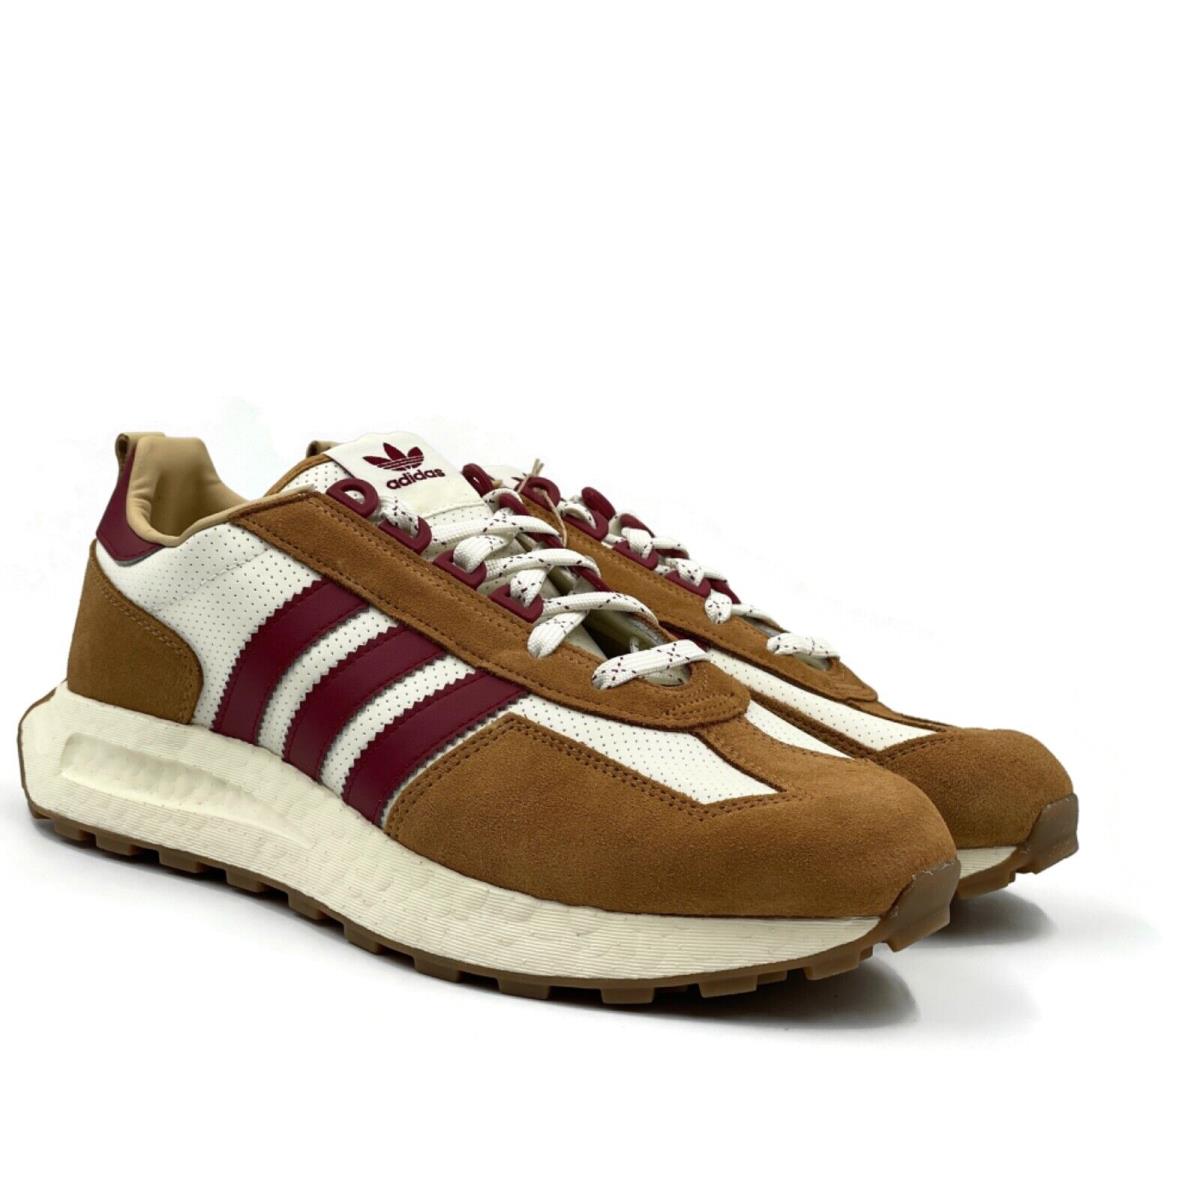 Adidas shoes Retropy - White Red Brown Beige 9